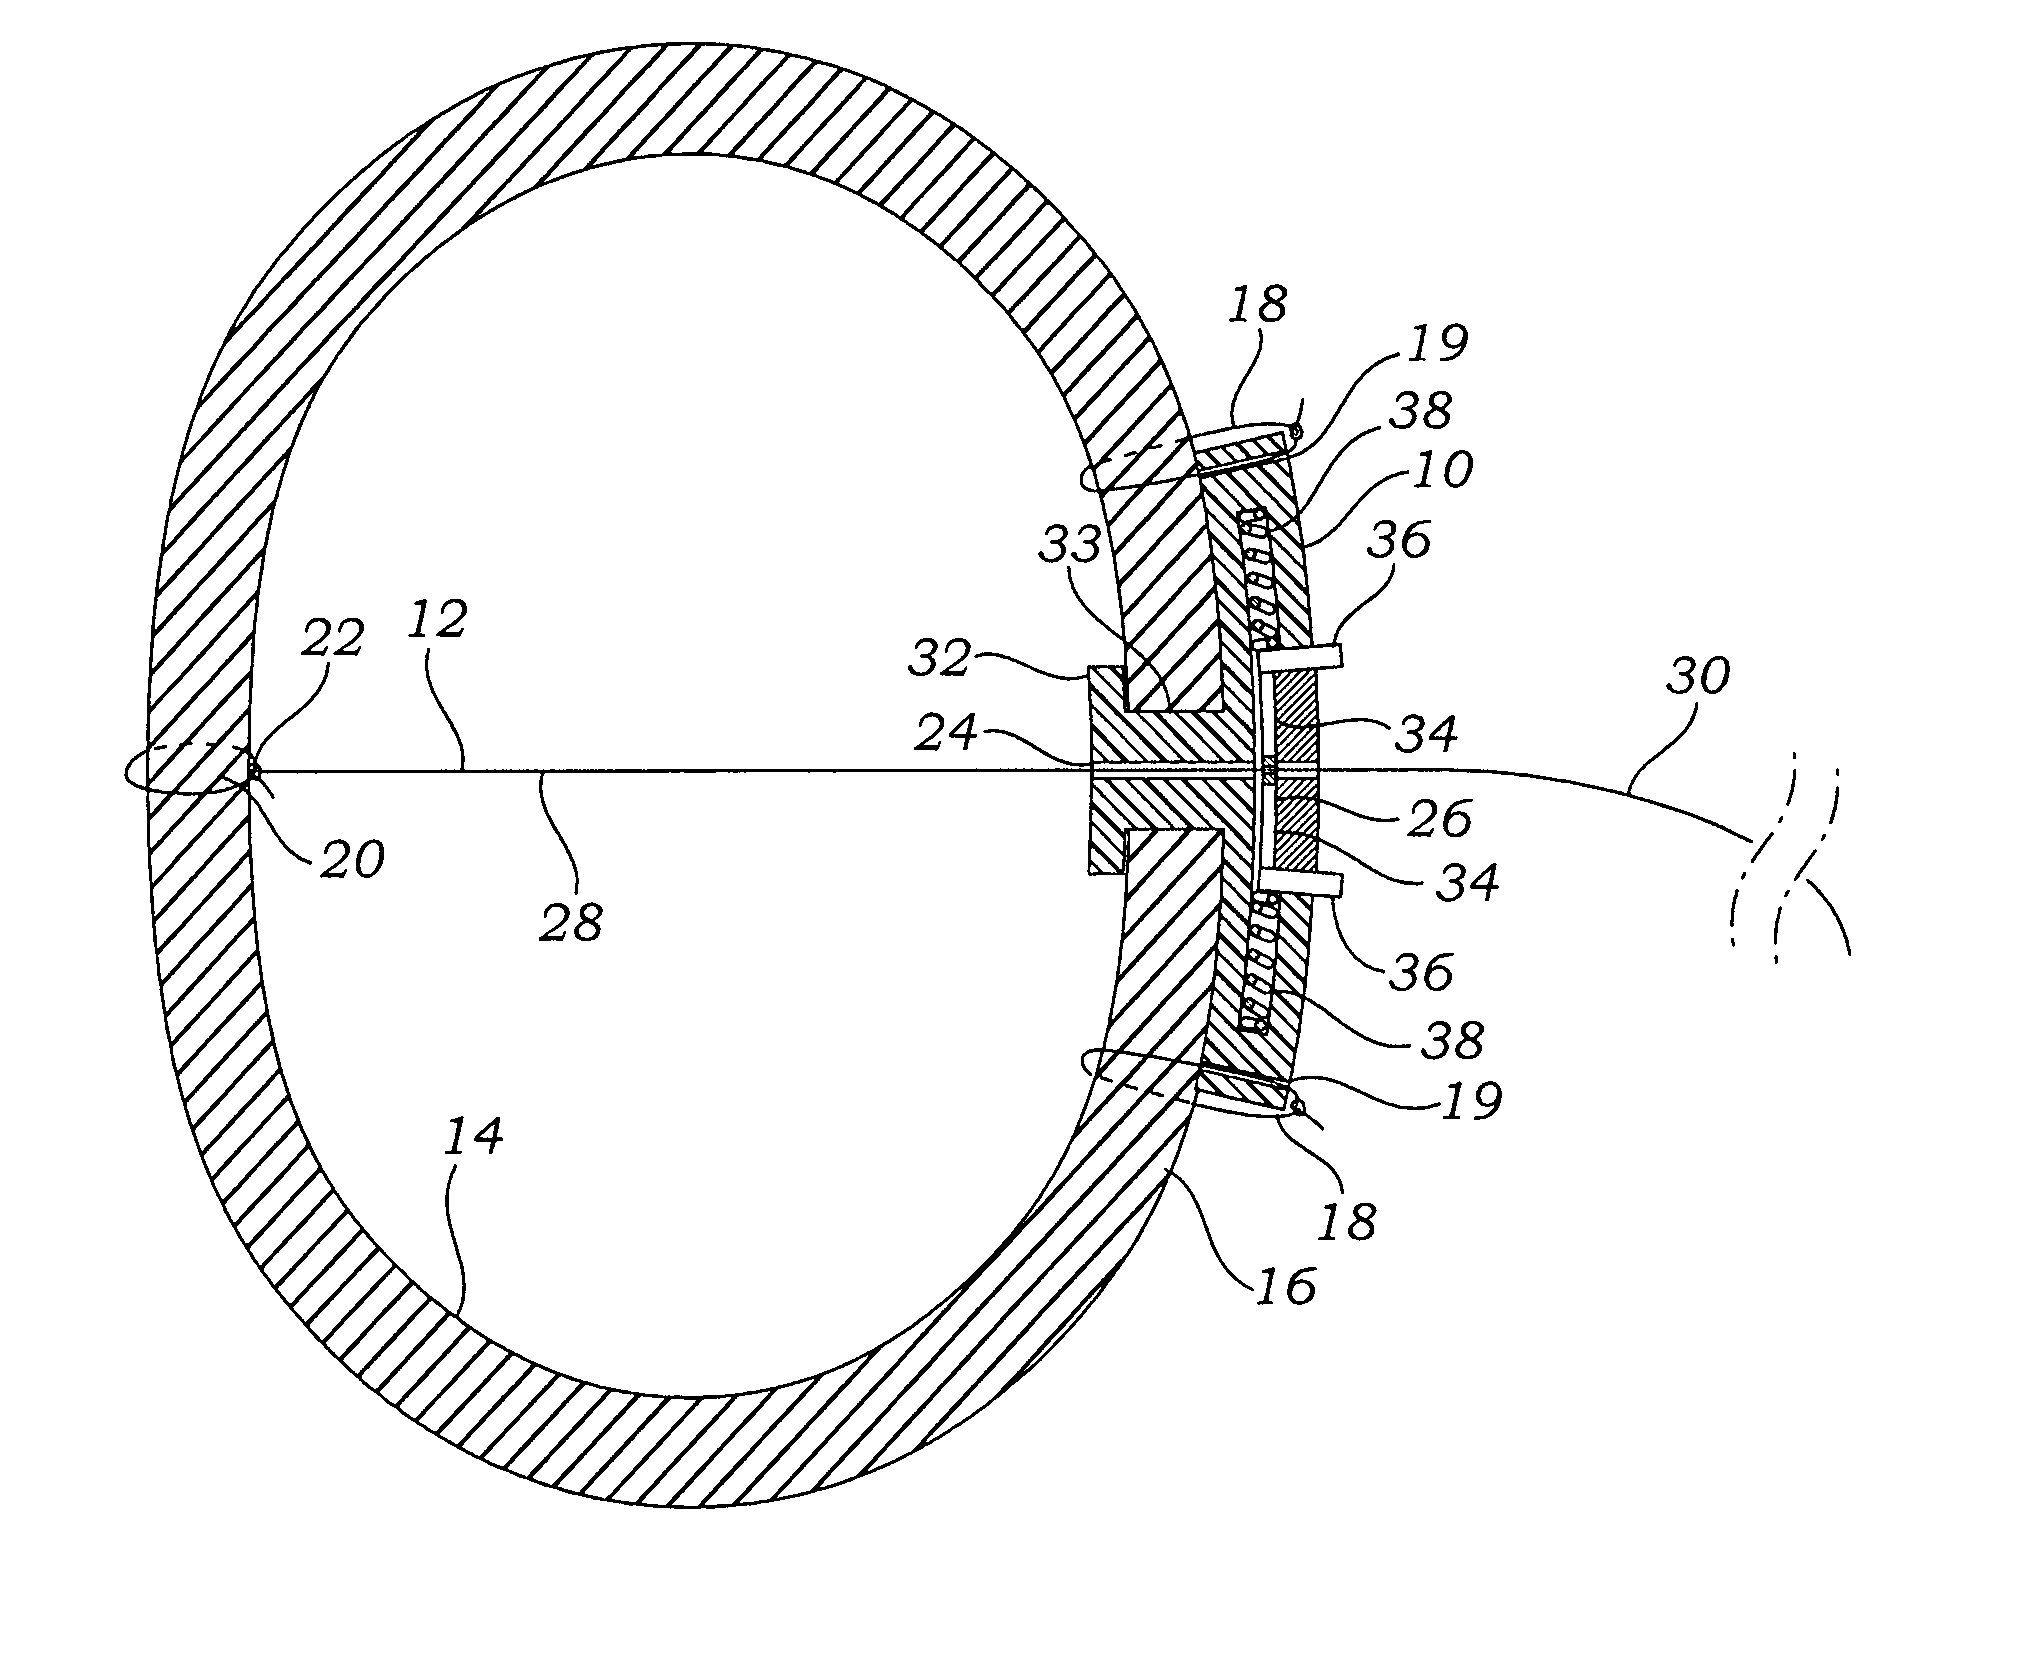 Apparatus, system, and method for applying and adjusting a tensioning element to a hollow body organ